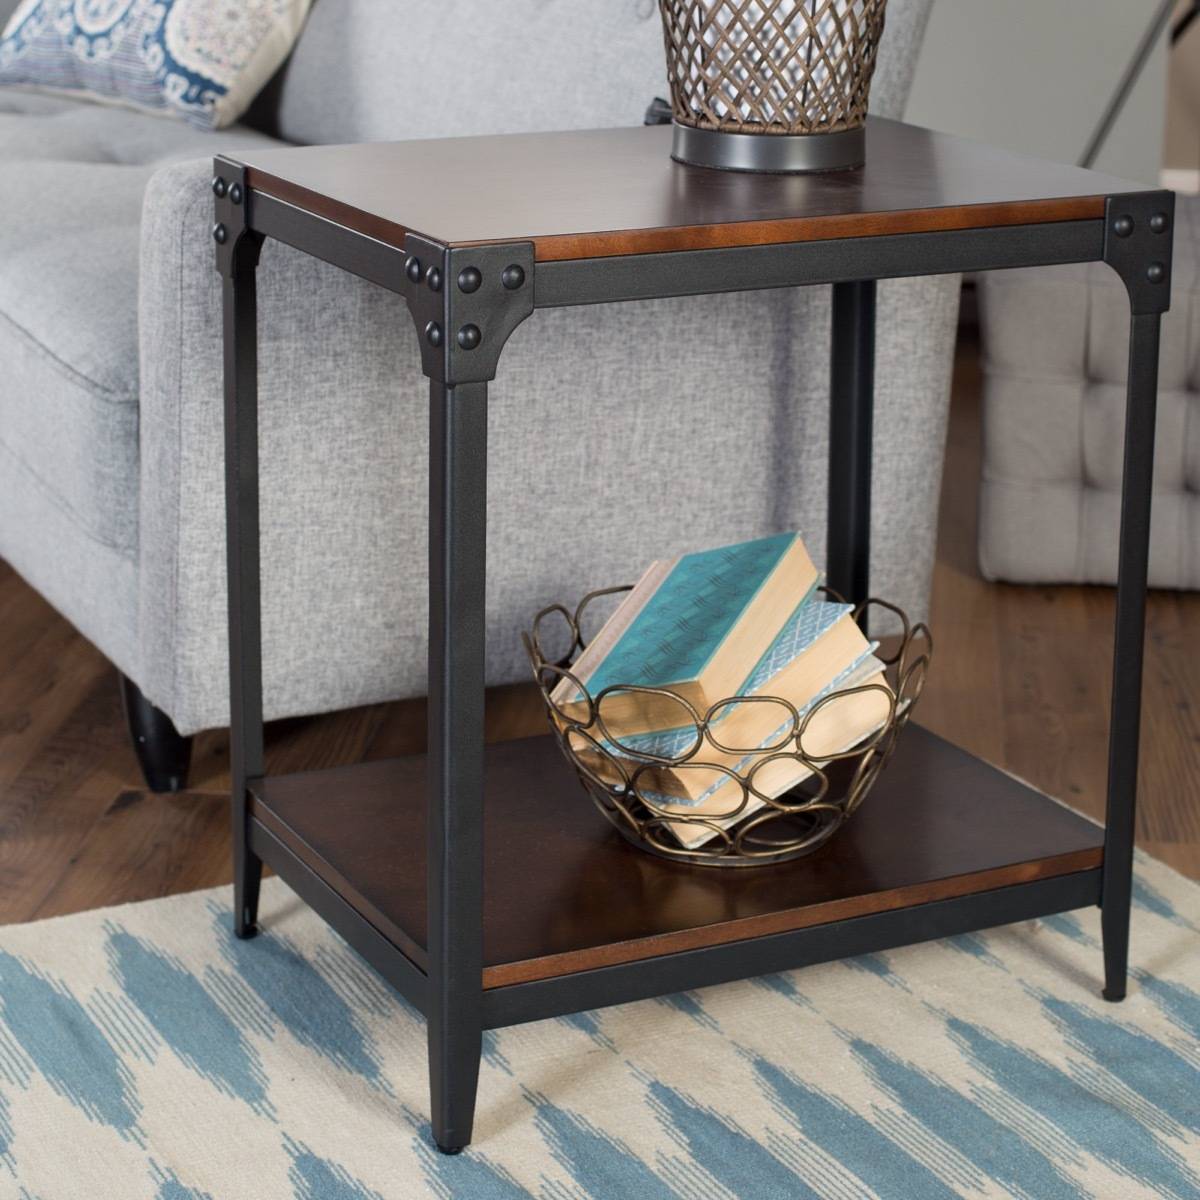 Trenton end table from Hayneedle